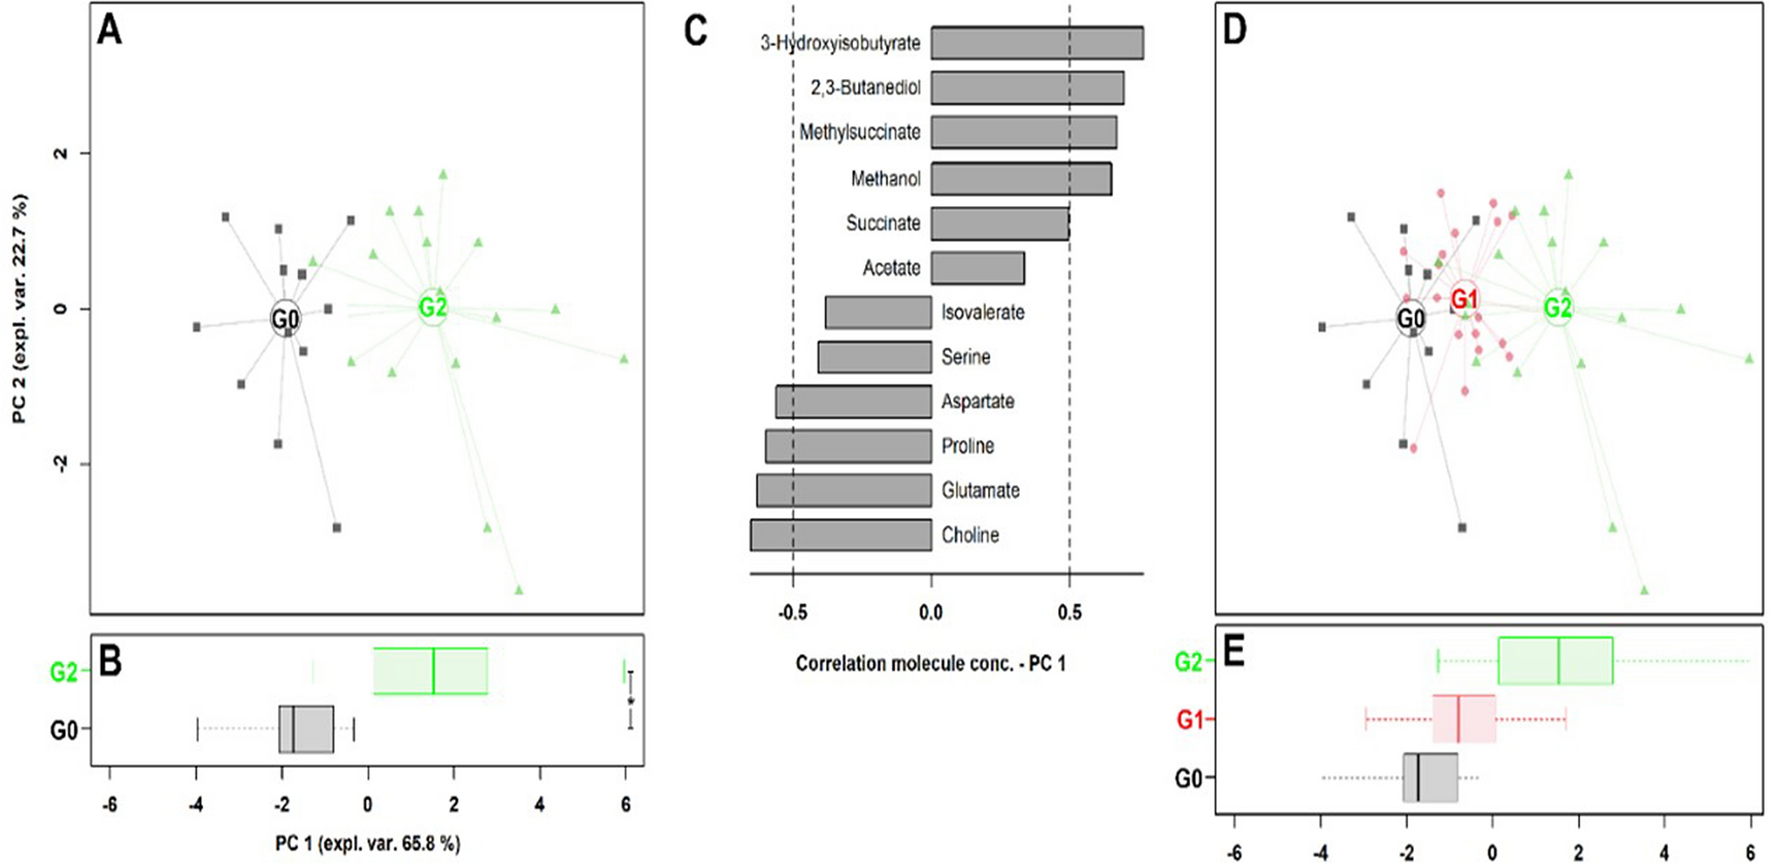 Differences in the serum metabolome profile of dairy cows according to the  BHB concentration revealed by proton nuclear magnetic resonance  spectroscopy (1H-NMR) | Scientific Reports